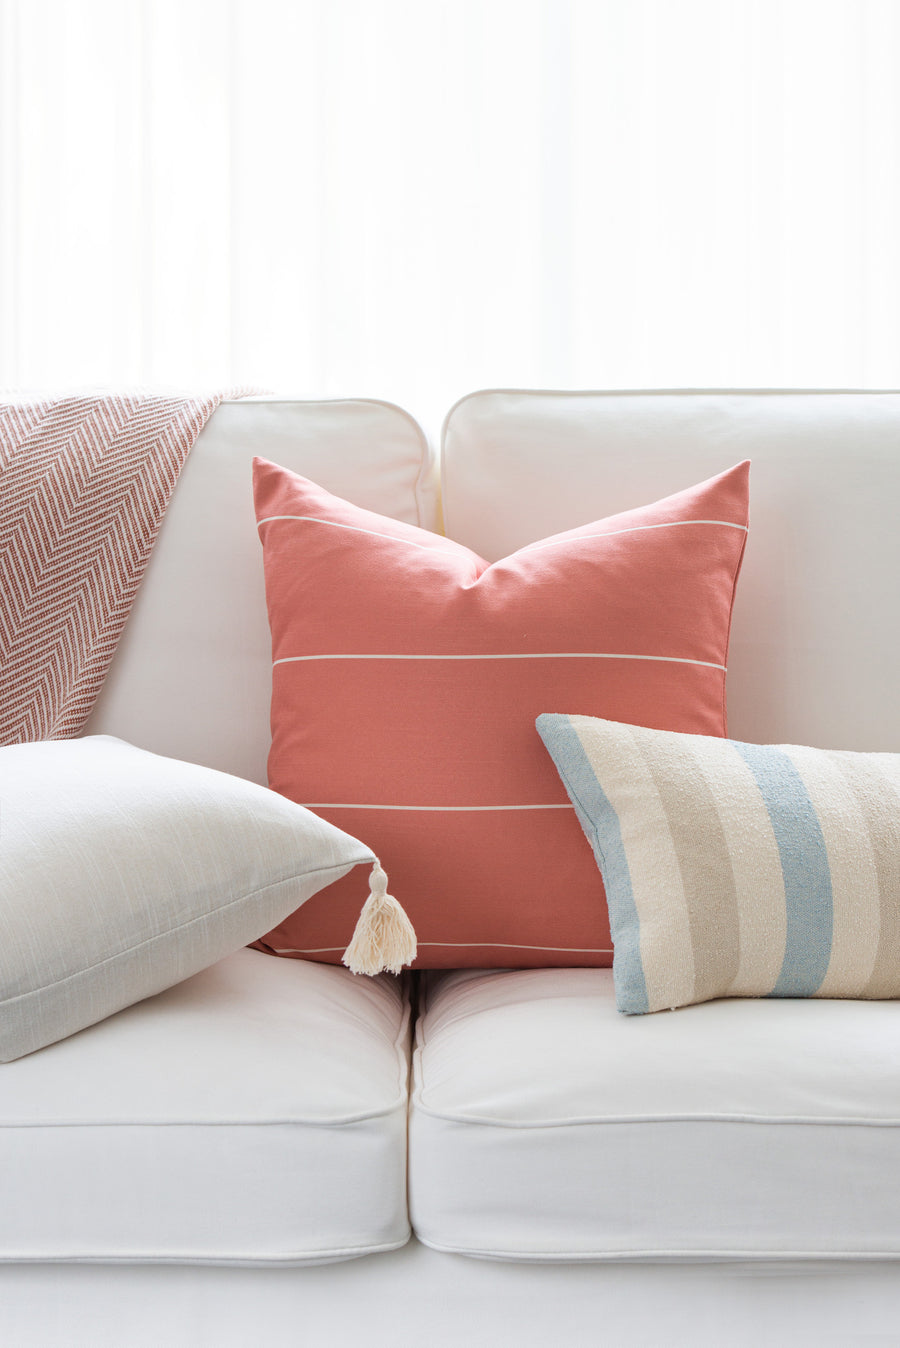 Modern Boho Outdoor Pillow Cover, Dusty Coral Striped, 20